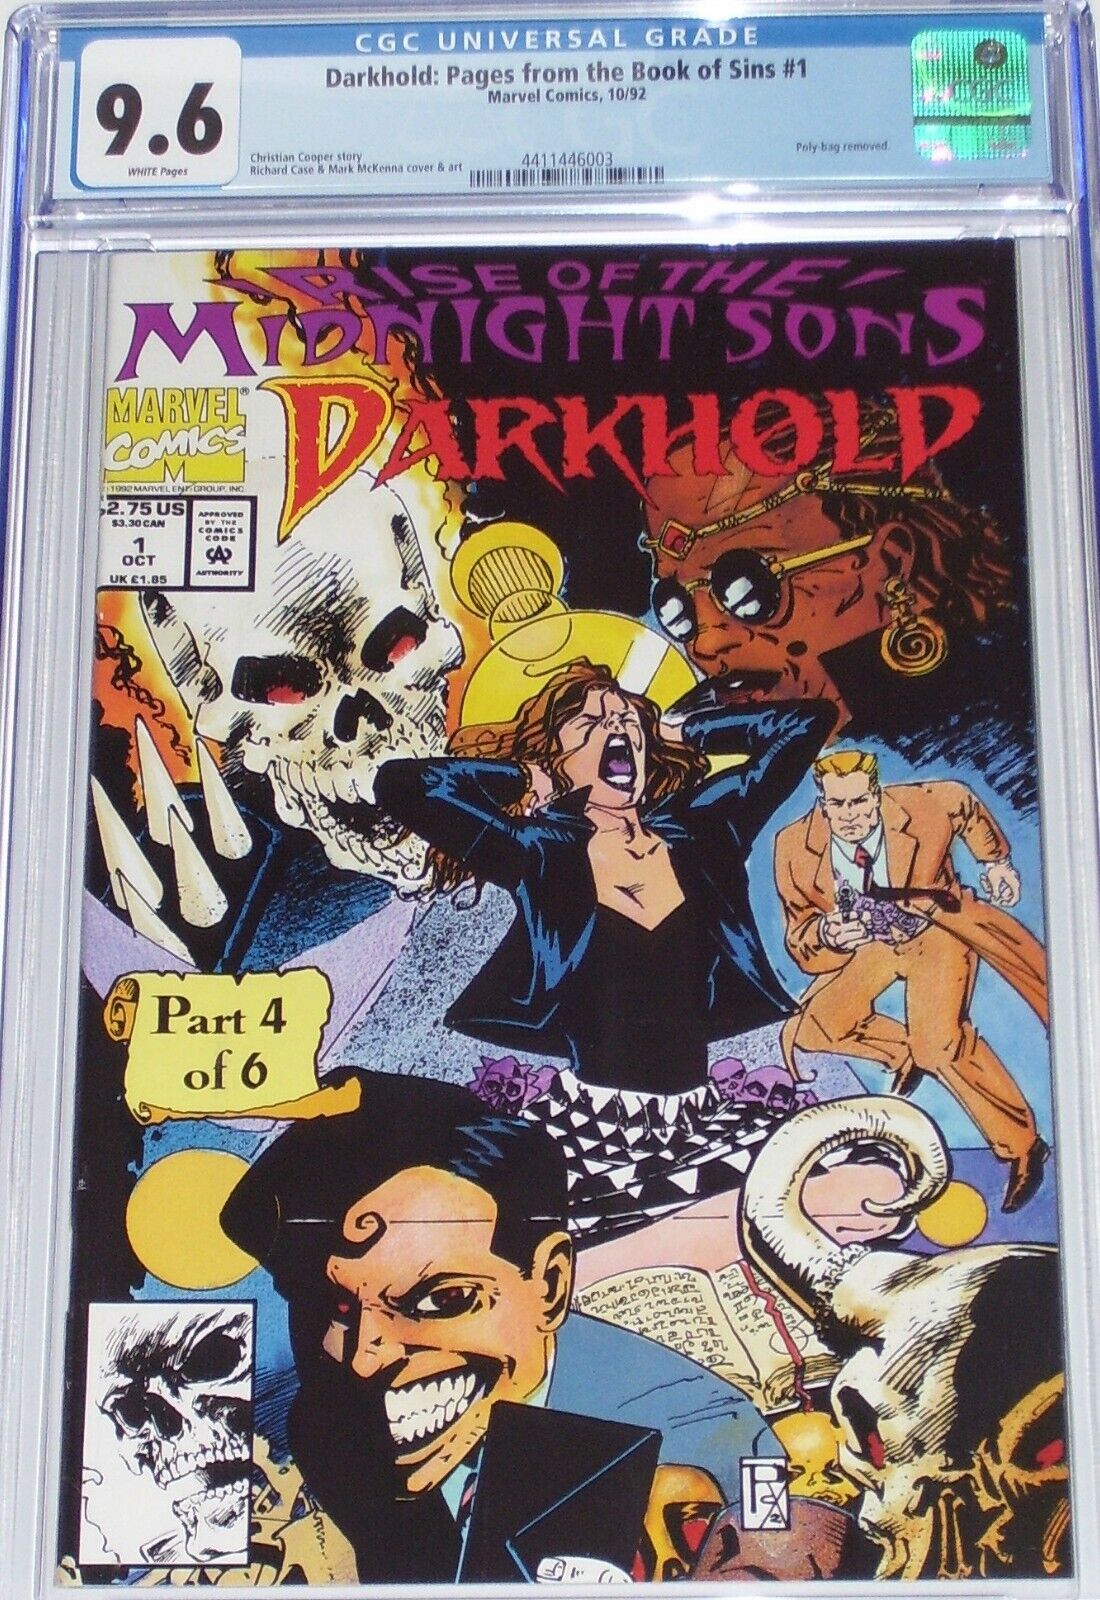 Darkhold: Pages from the Book of Sins #1 CGC 9.6 Poly-bagged Edition from 1992